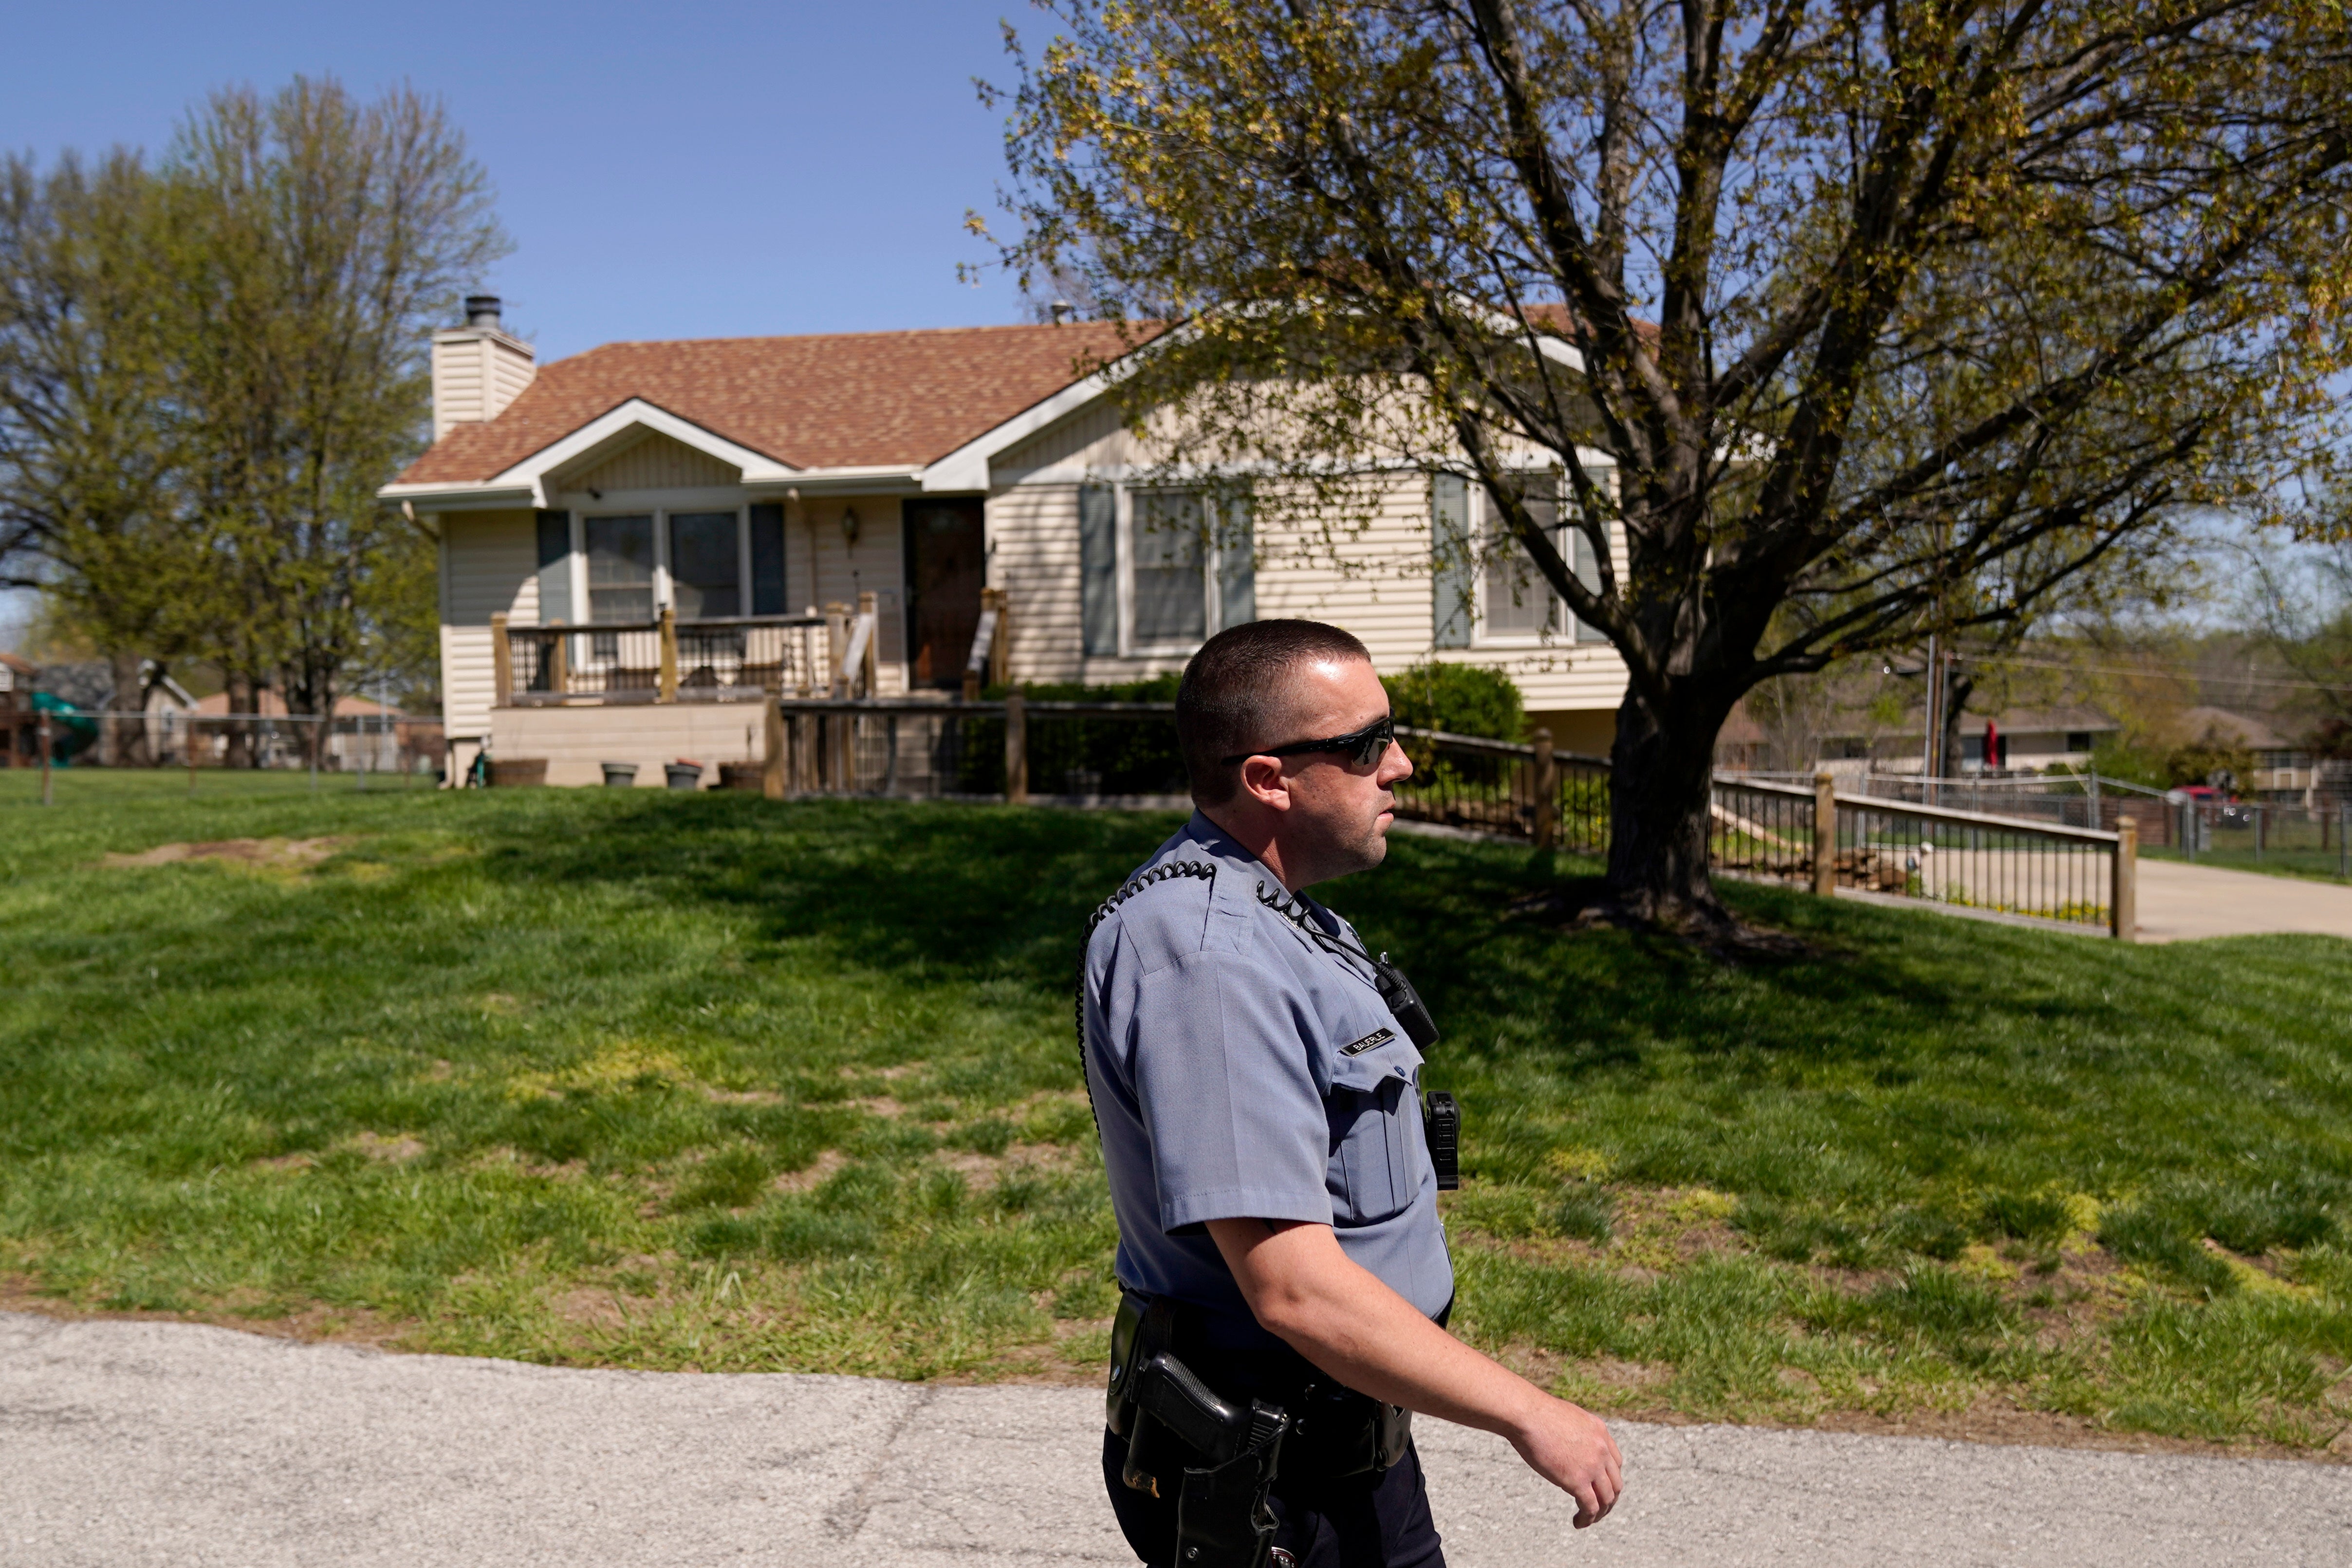 Police officer walks past the house where the shooting took place